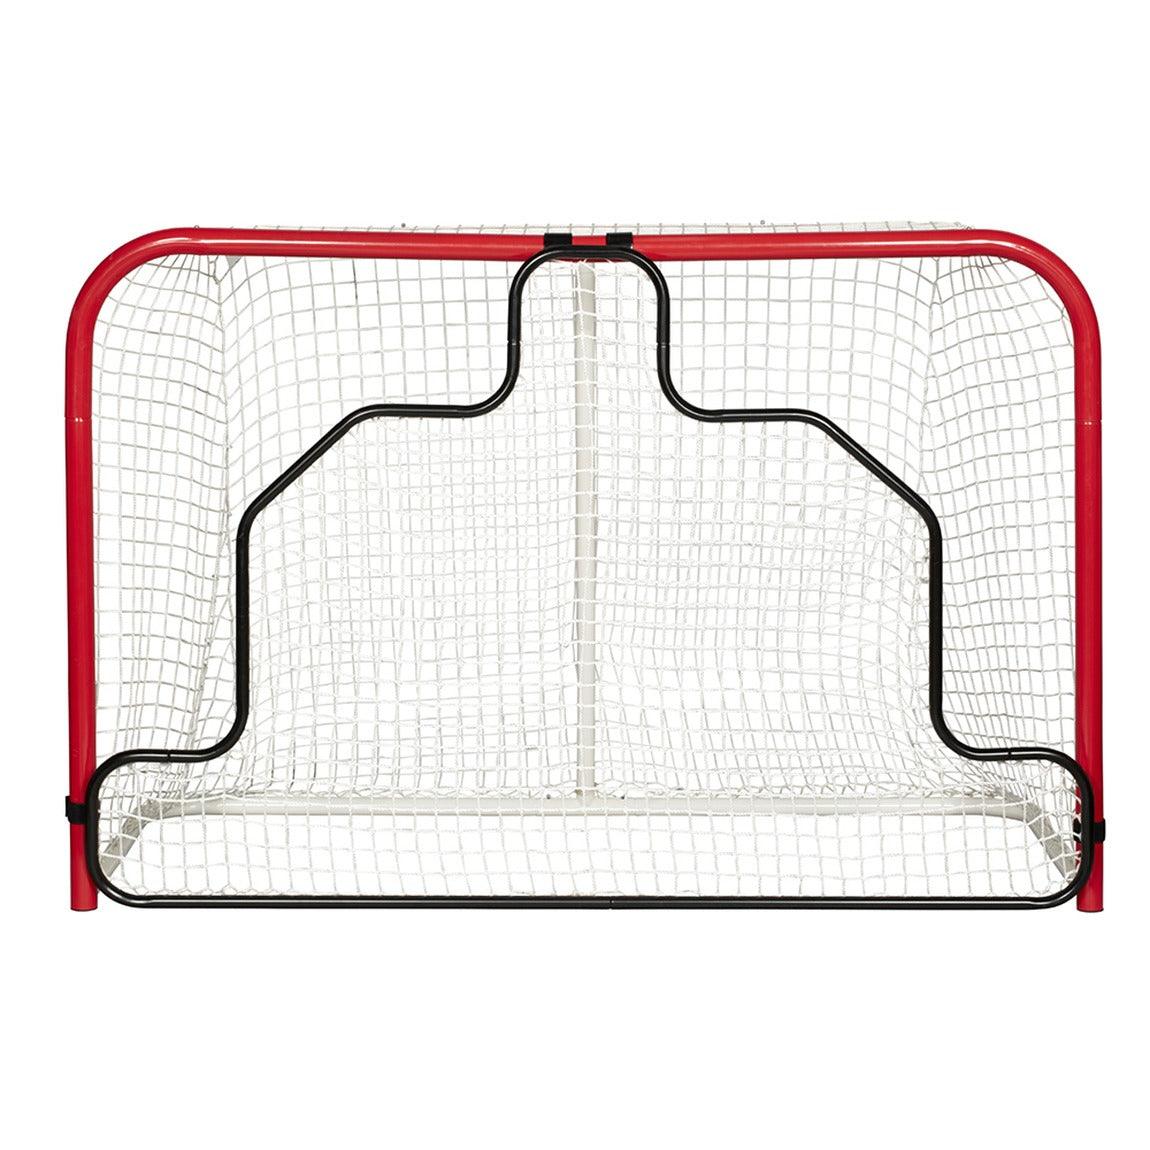 Hockey Shooting Target 72" - Metal - Sports Excellence